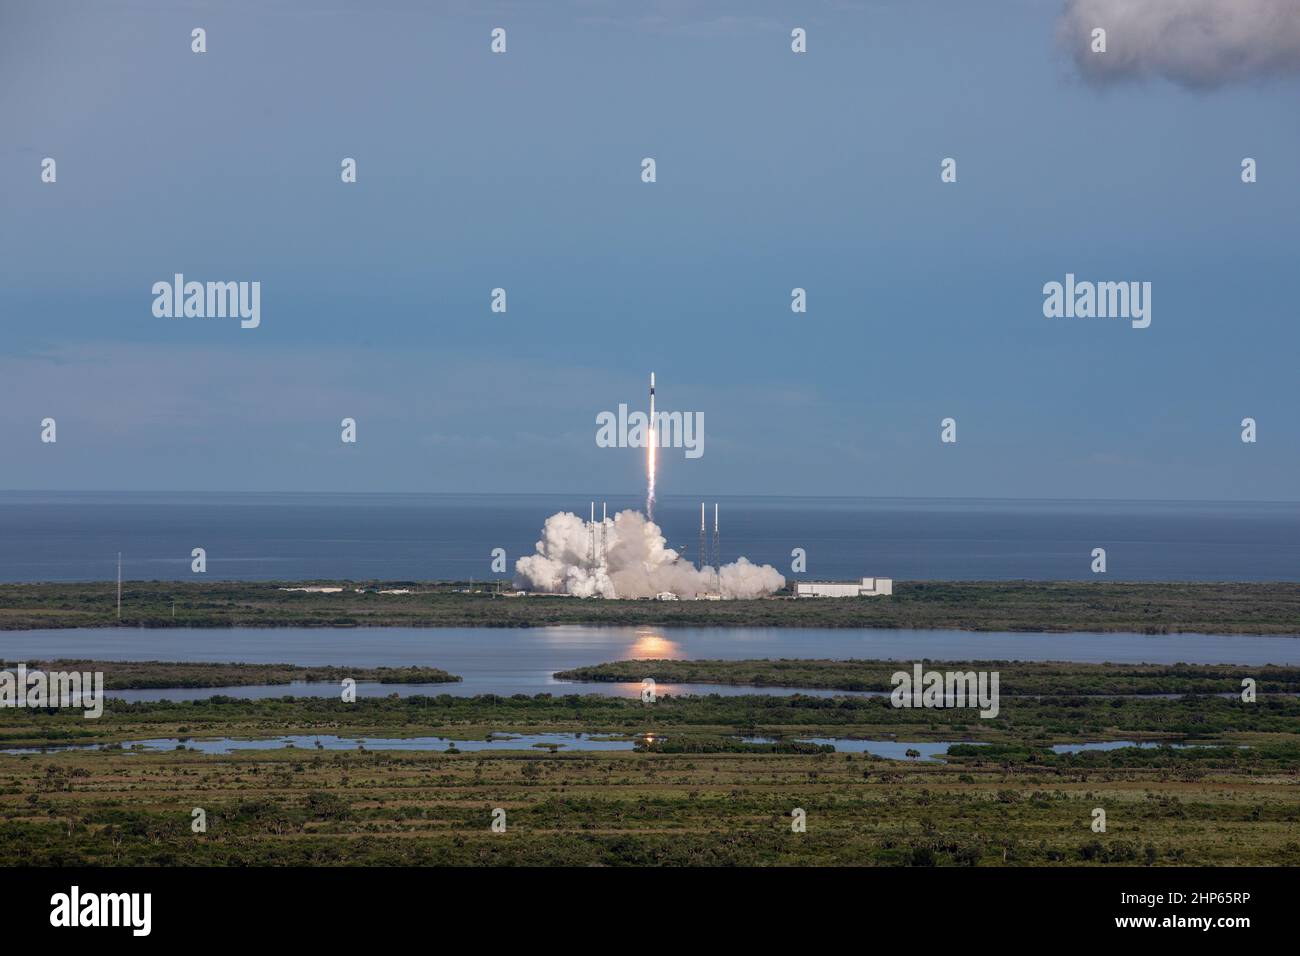 A SpaceX Falcon 9 rocket lifts off from Space Launch Complex 40 at Cape Canaveral Air Force Station at 6:01 p.m. EDT on July 25, 2019, carrying the Dragon spacecraft on the company’s 18th Commercial Resupply Services (CRS-18) mission to the International Space Station. Stock Photo